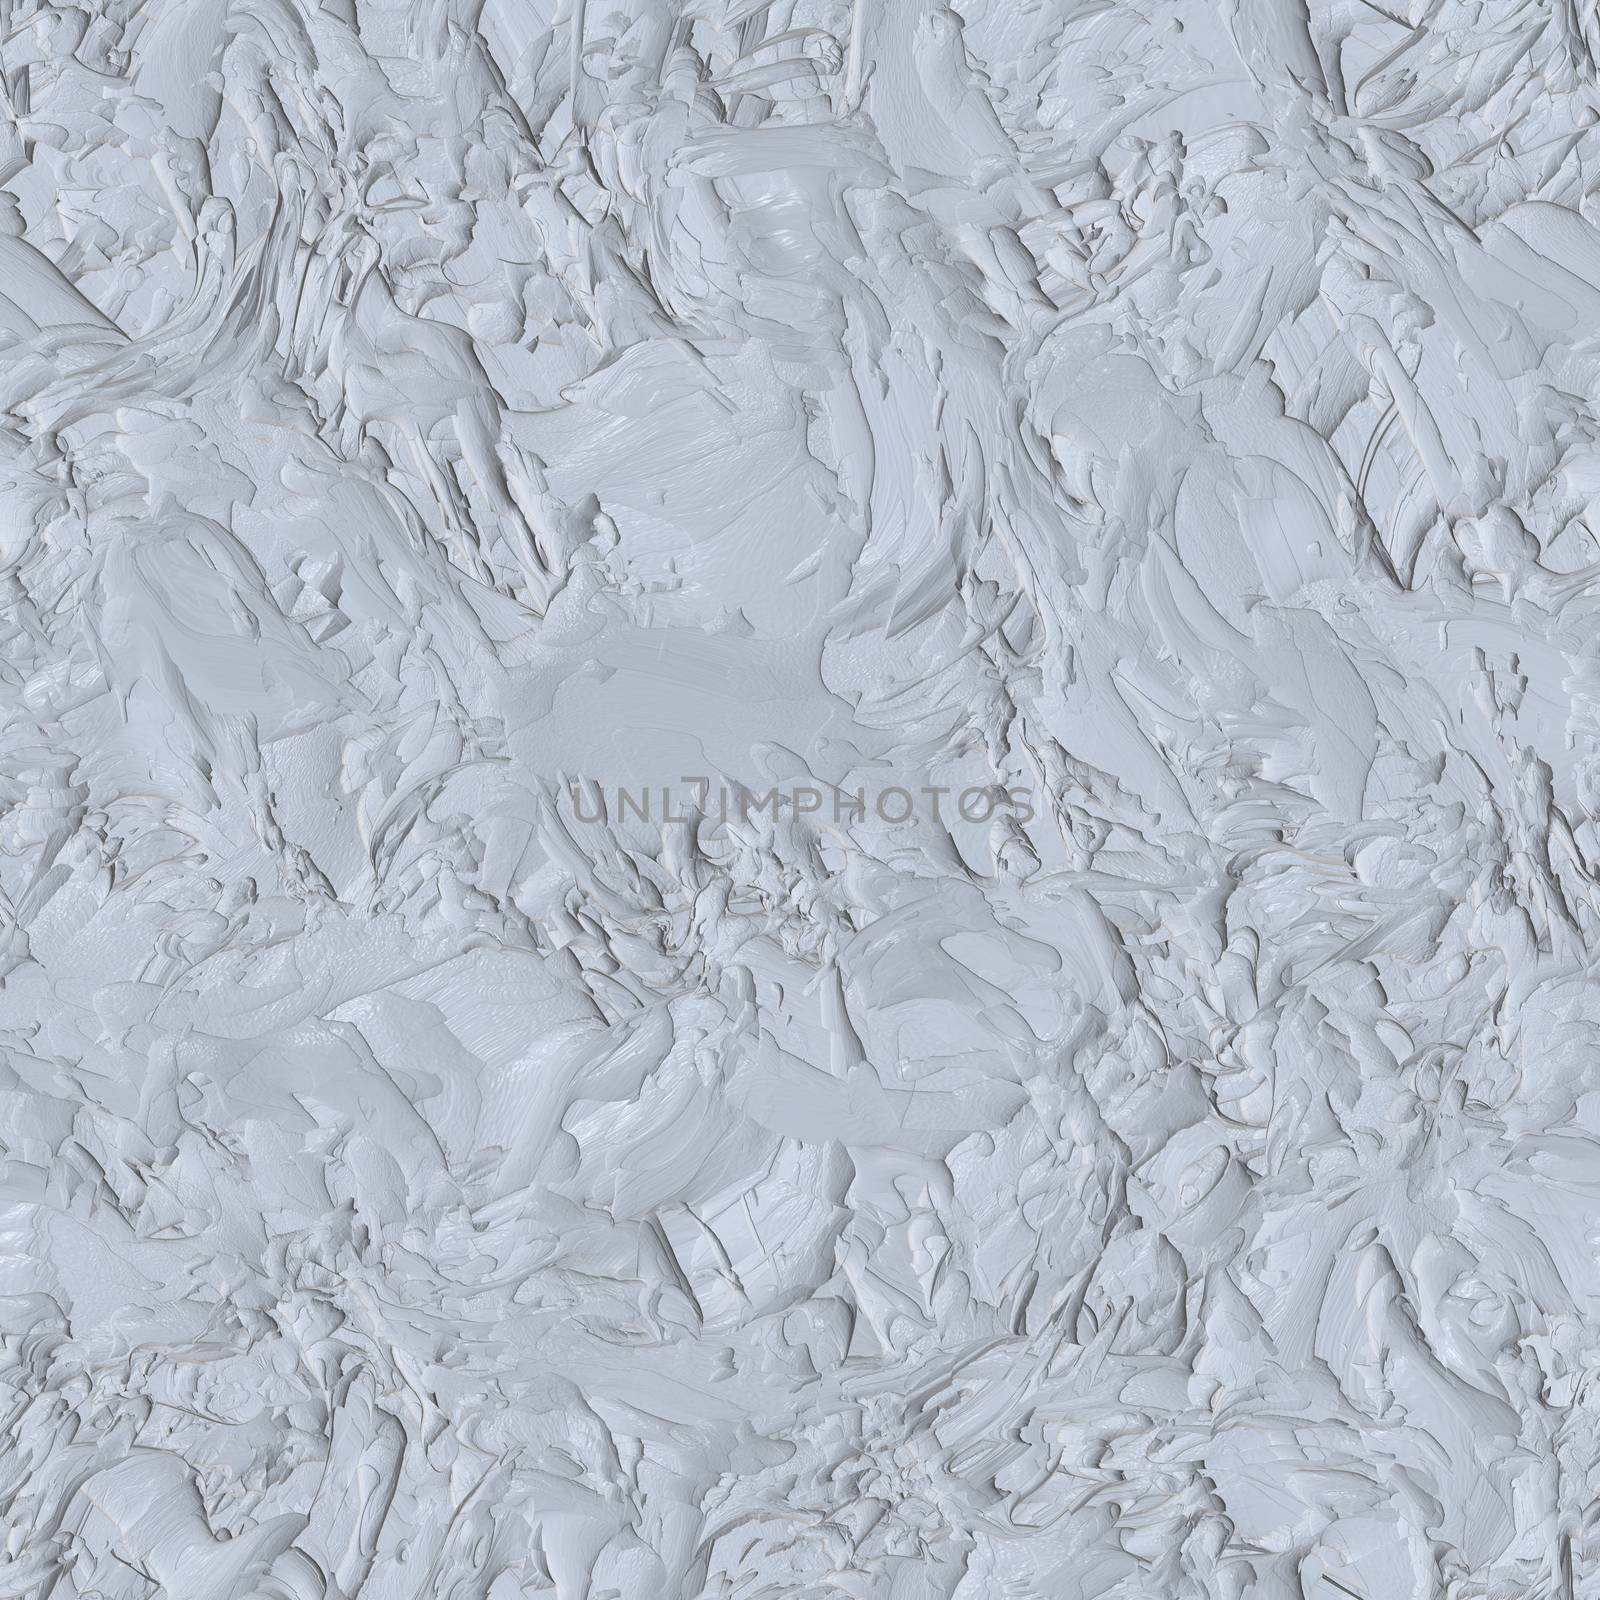 bright grunge plaster stucco background, old cement wall, rough texture, seamless pattern.